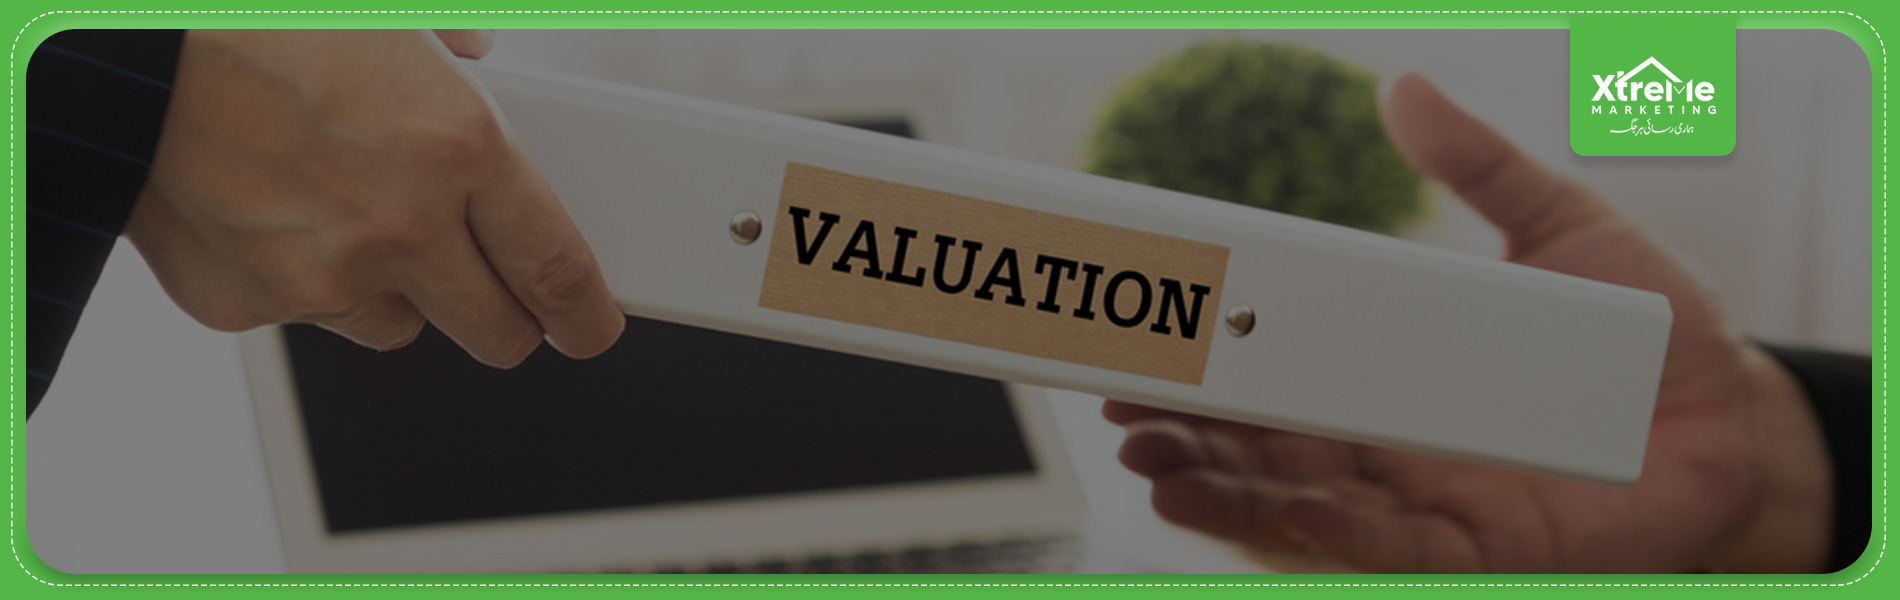 How to get the property valuation certificate in Pakistan.jpg